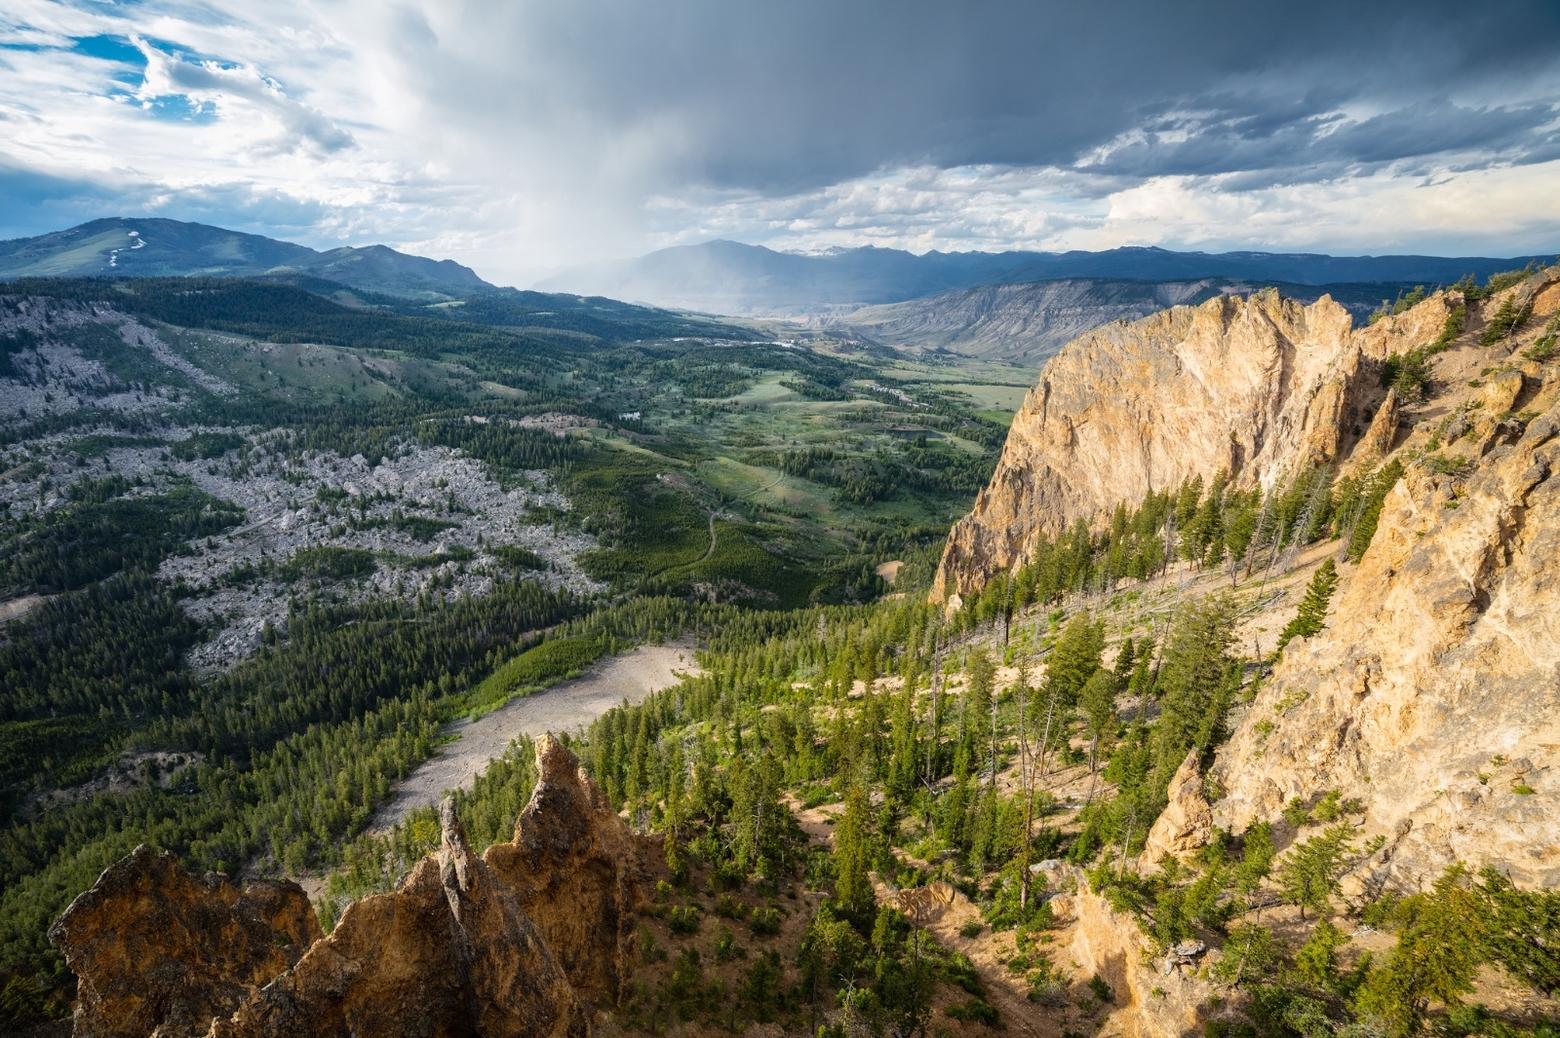 Just a small example of the expansive lands Wenk and colleagues oversee and protect.  Views from the Bunsen Peak Trail, Yellowstone National Park.  NPS photo / Jacob W. Frank